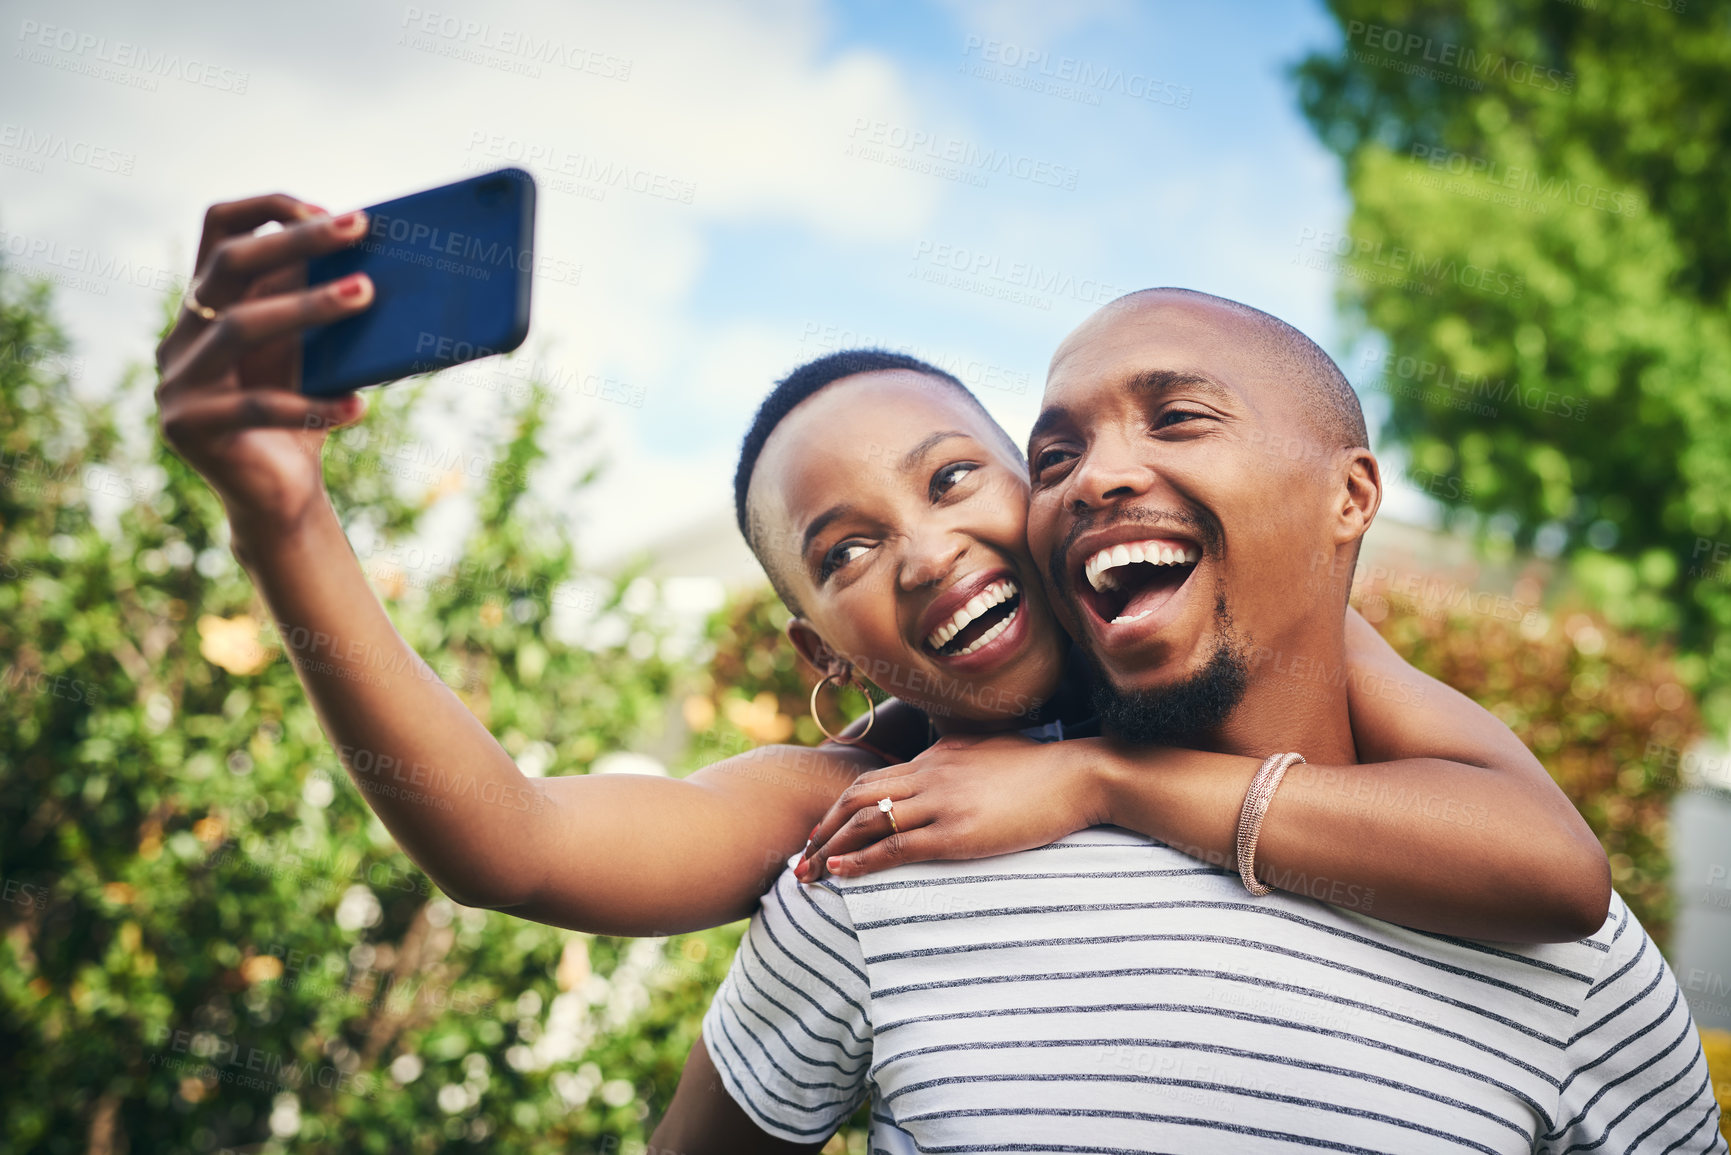 Buy stock photo Cropped shot of a happy young couple taking a selfie outside